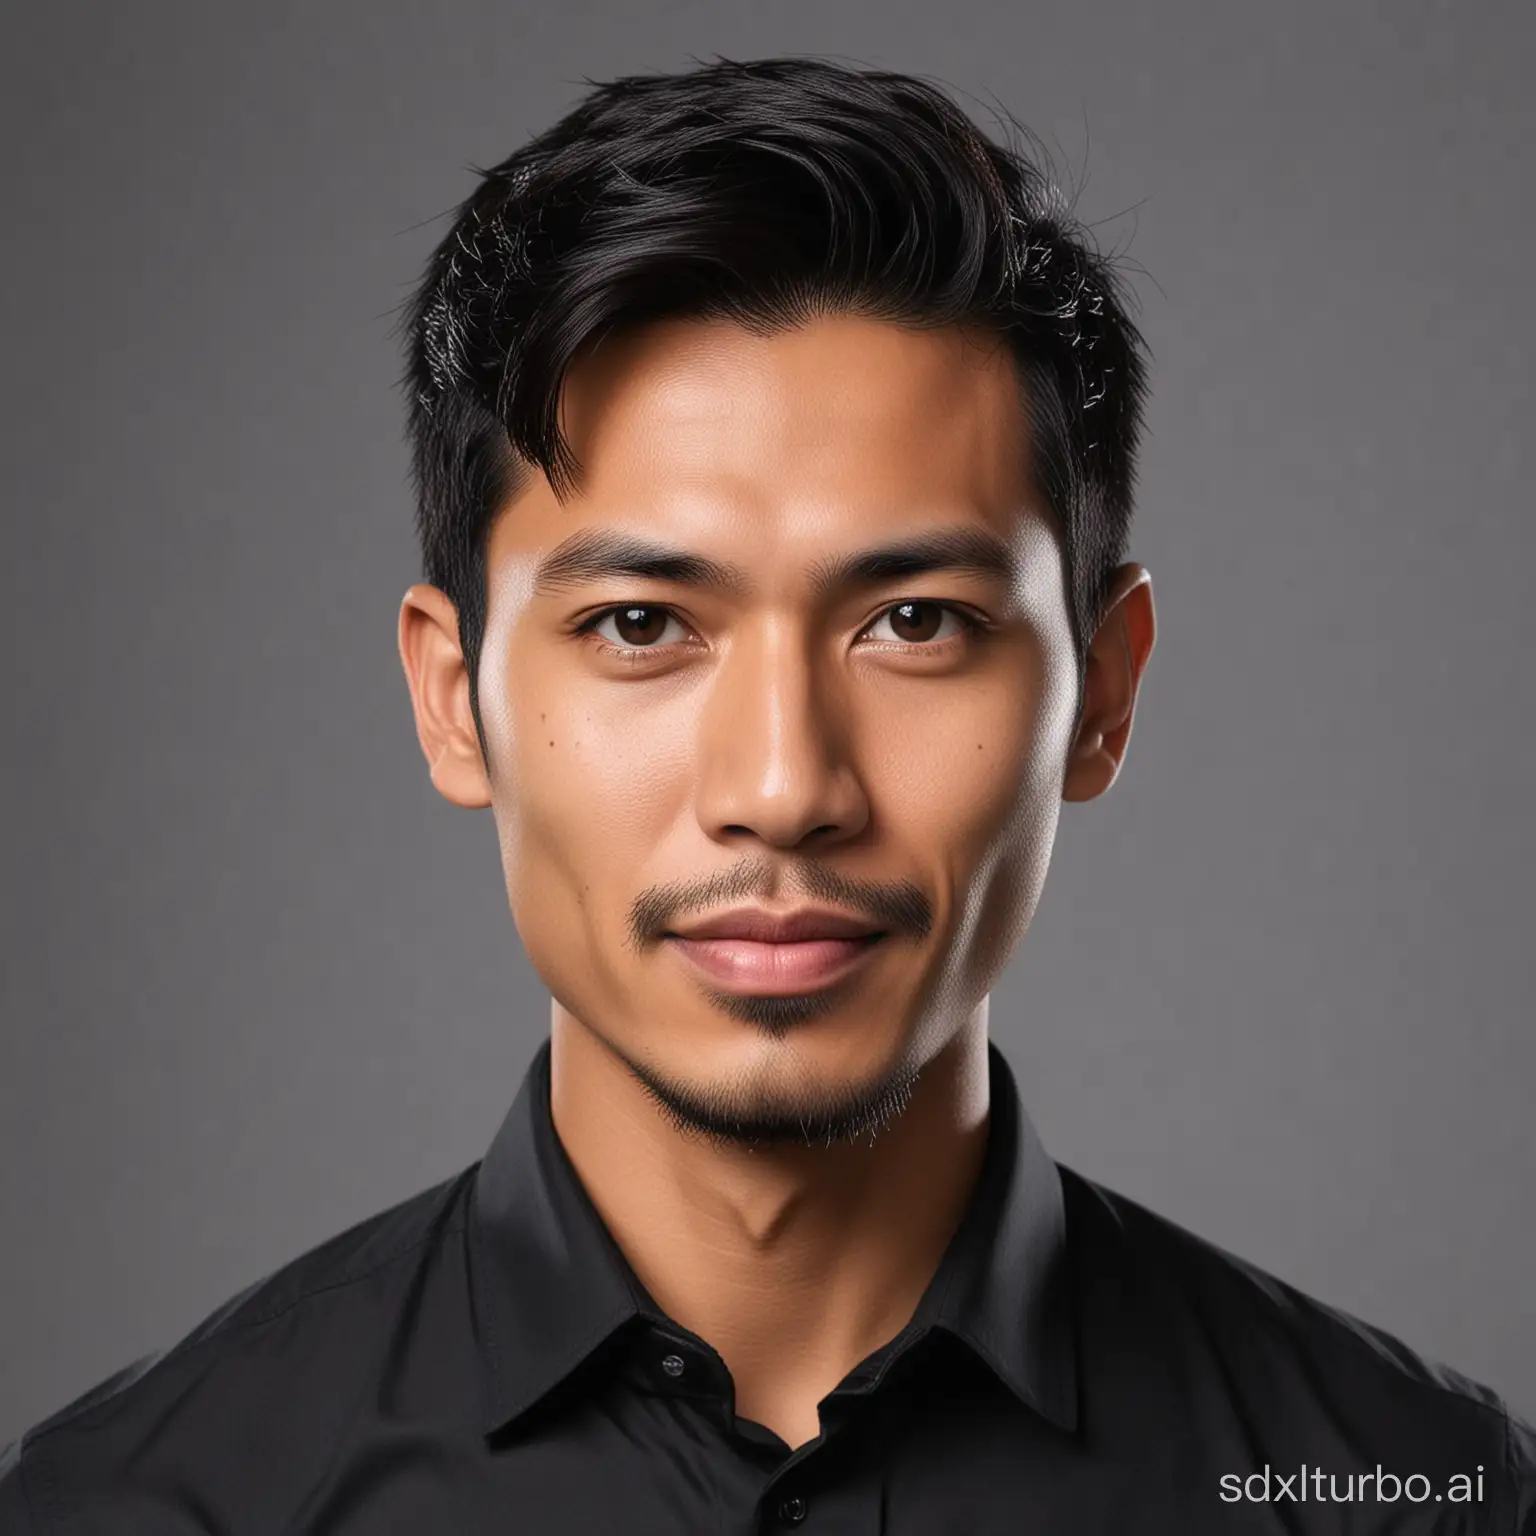 Create a headshot of a handsome 31 year old Javanese man wearing a black shirt